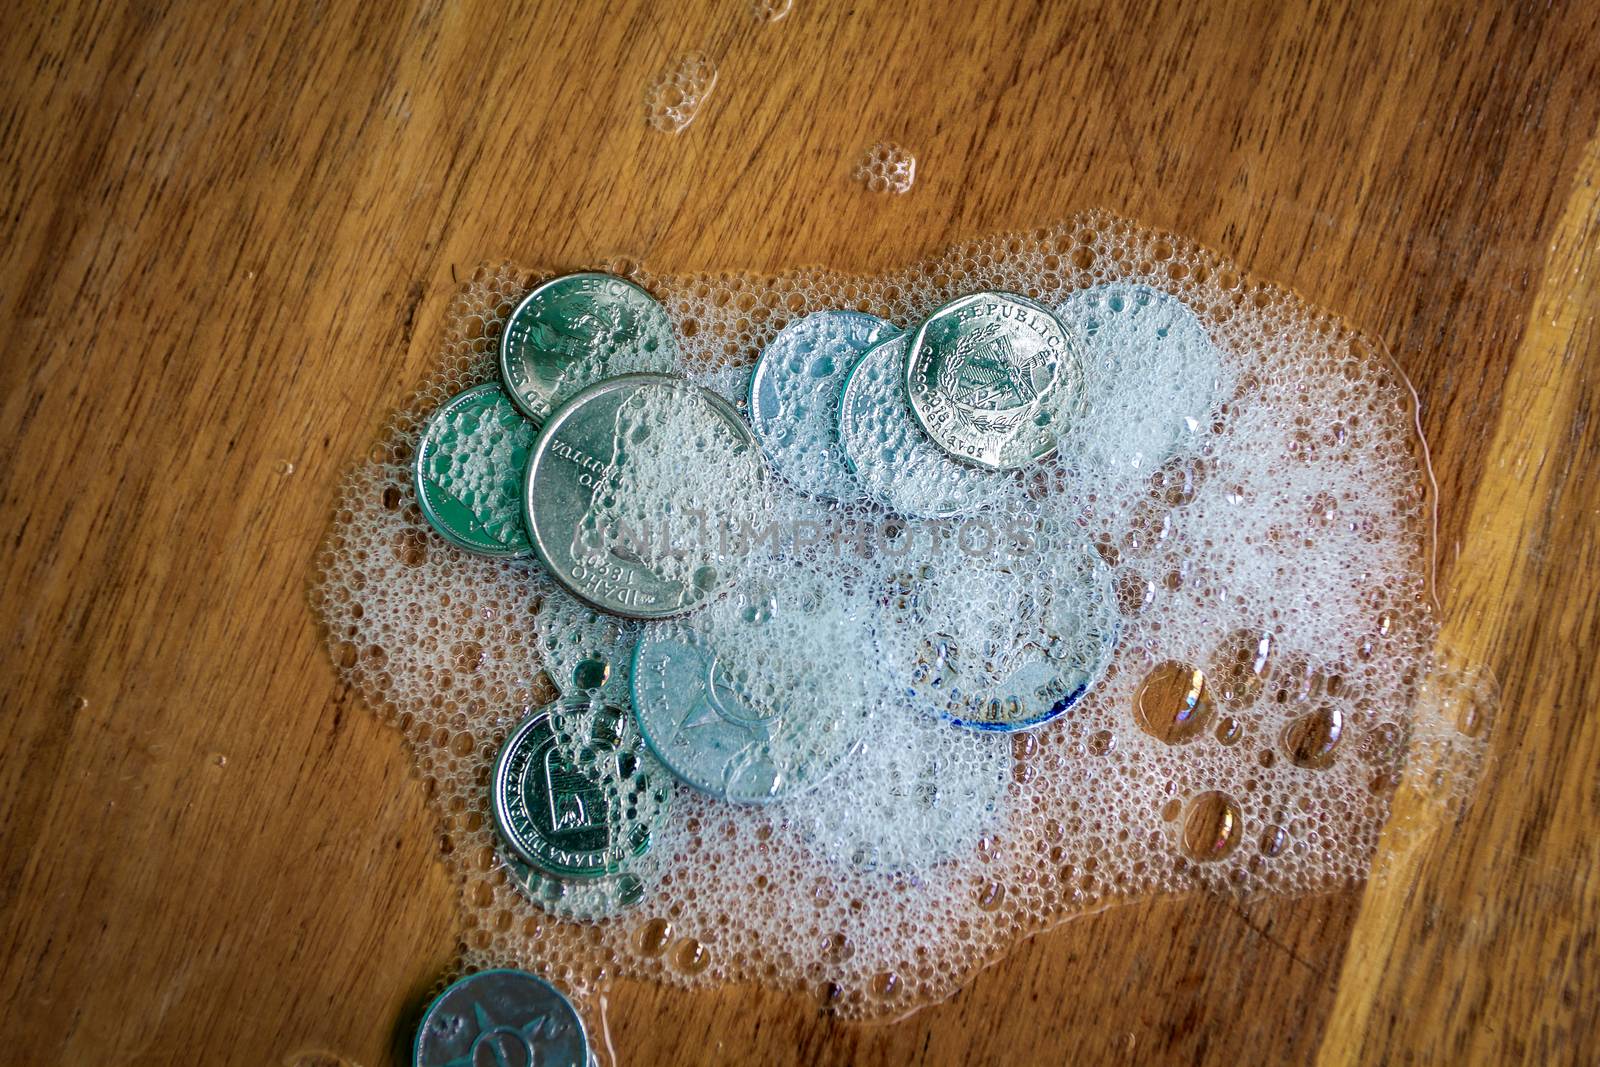 Group of coins covered in foam on a wooden surface